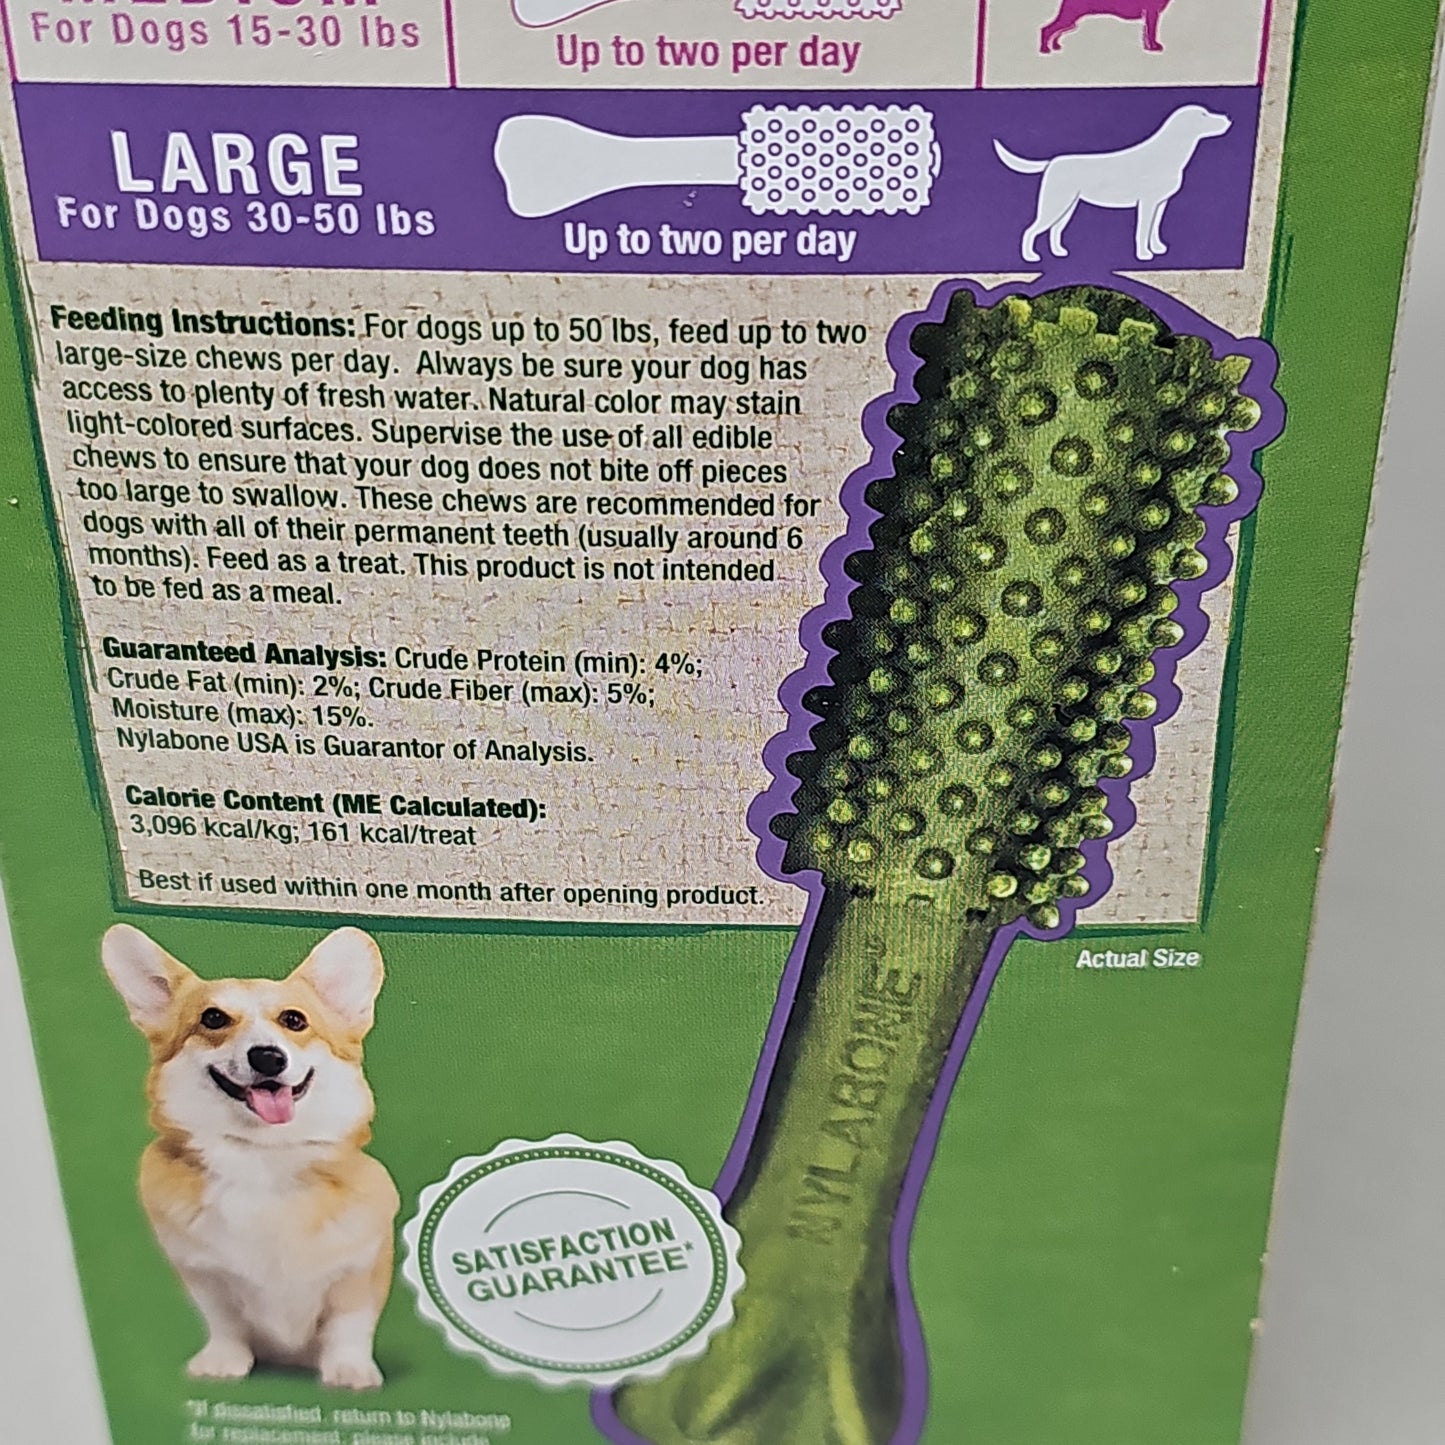 Z@ NYLABONE Natural Nutri Dent Dogs 20 Count Large 30-50 Lbs Dental Chew Treats NTD443T20P (New)